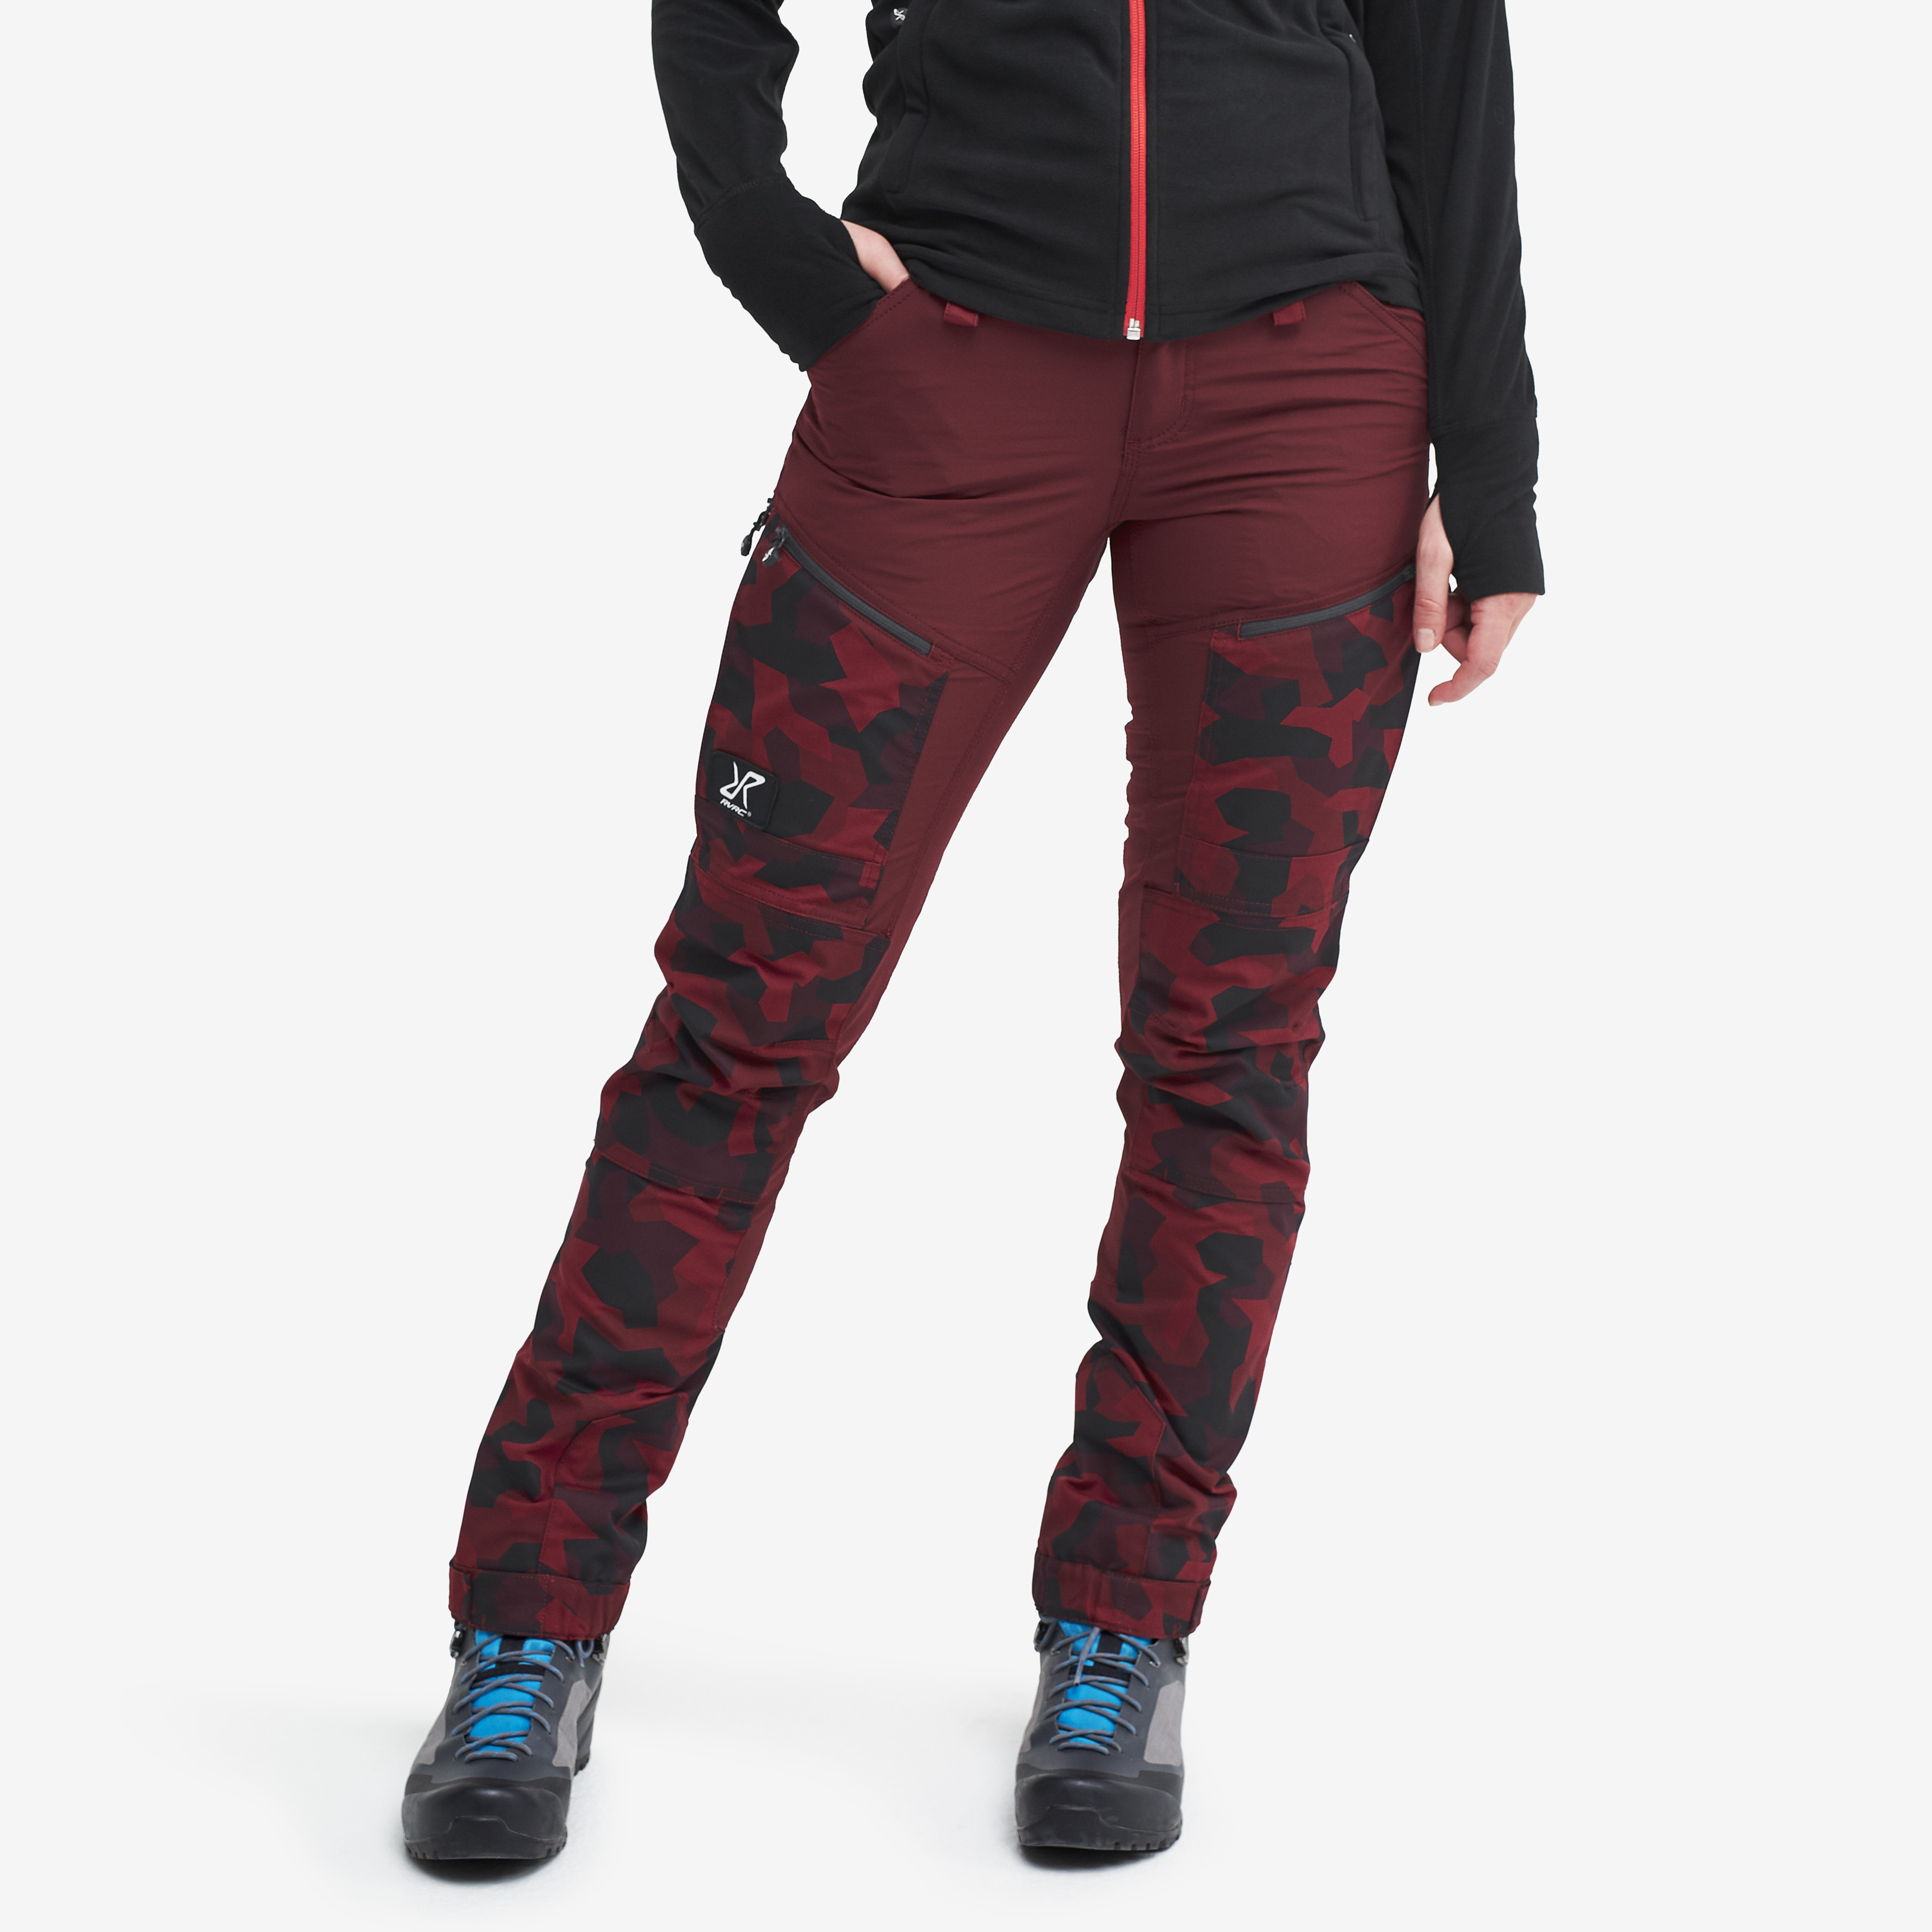 RVRC GP Pro hiking pants for women in red